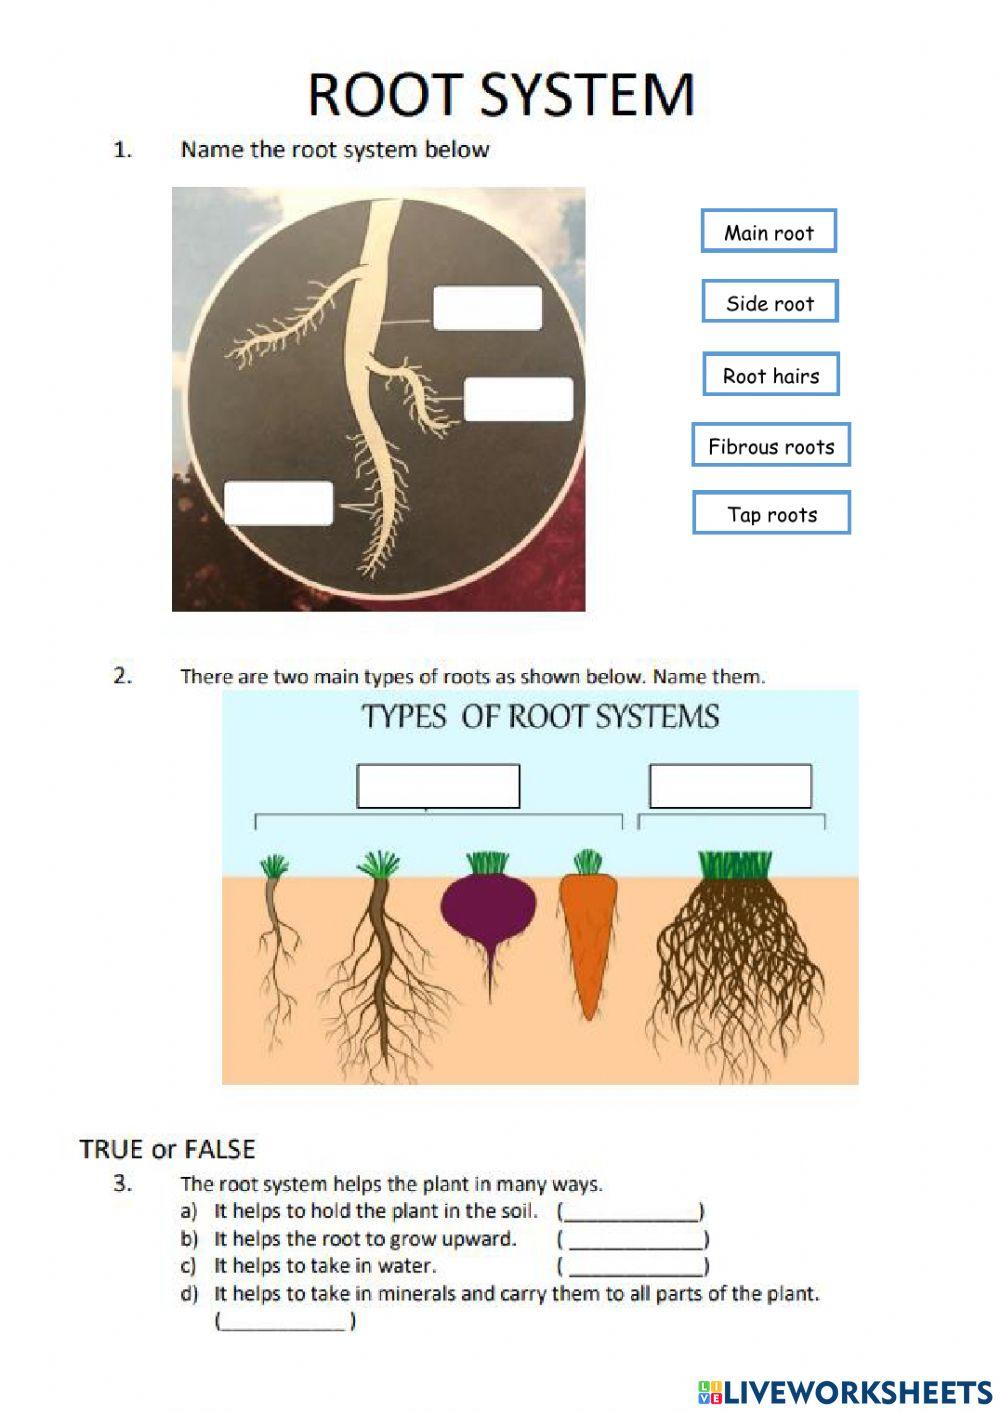 The root system